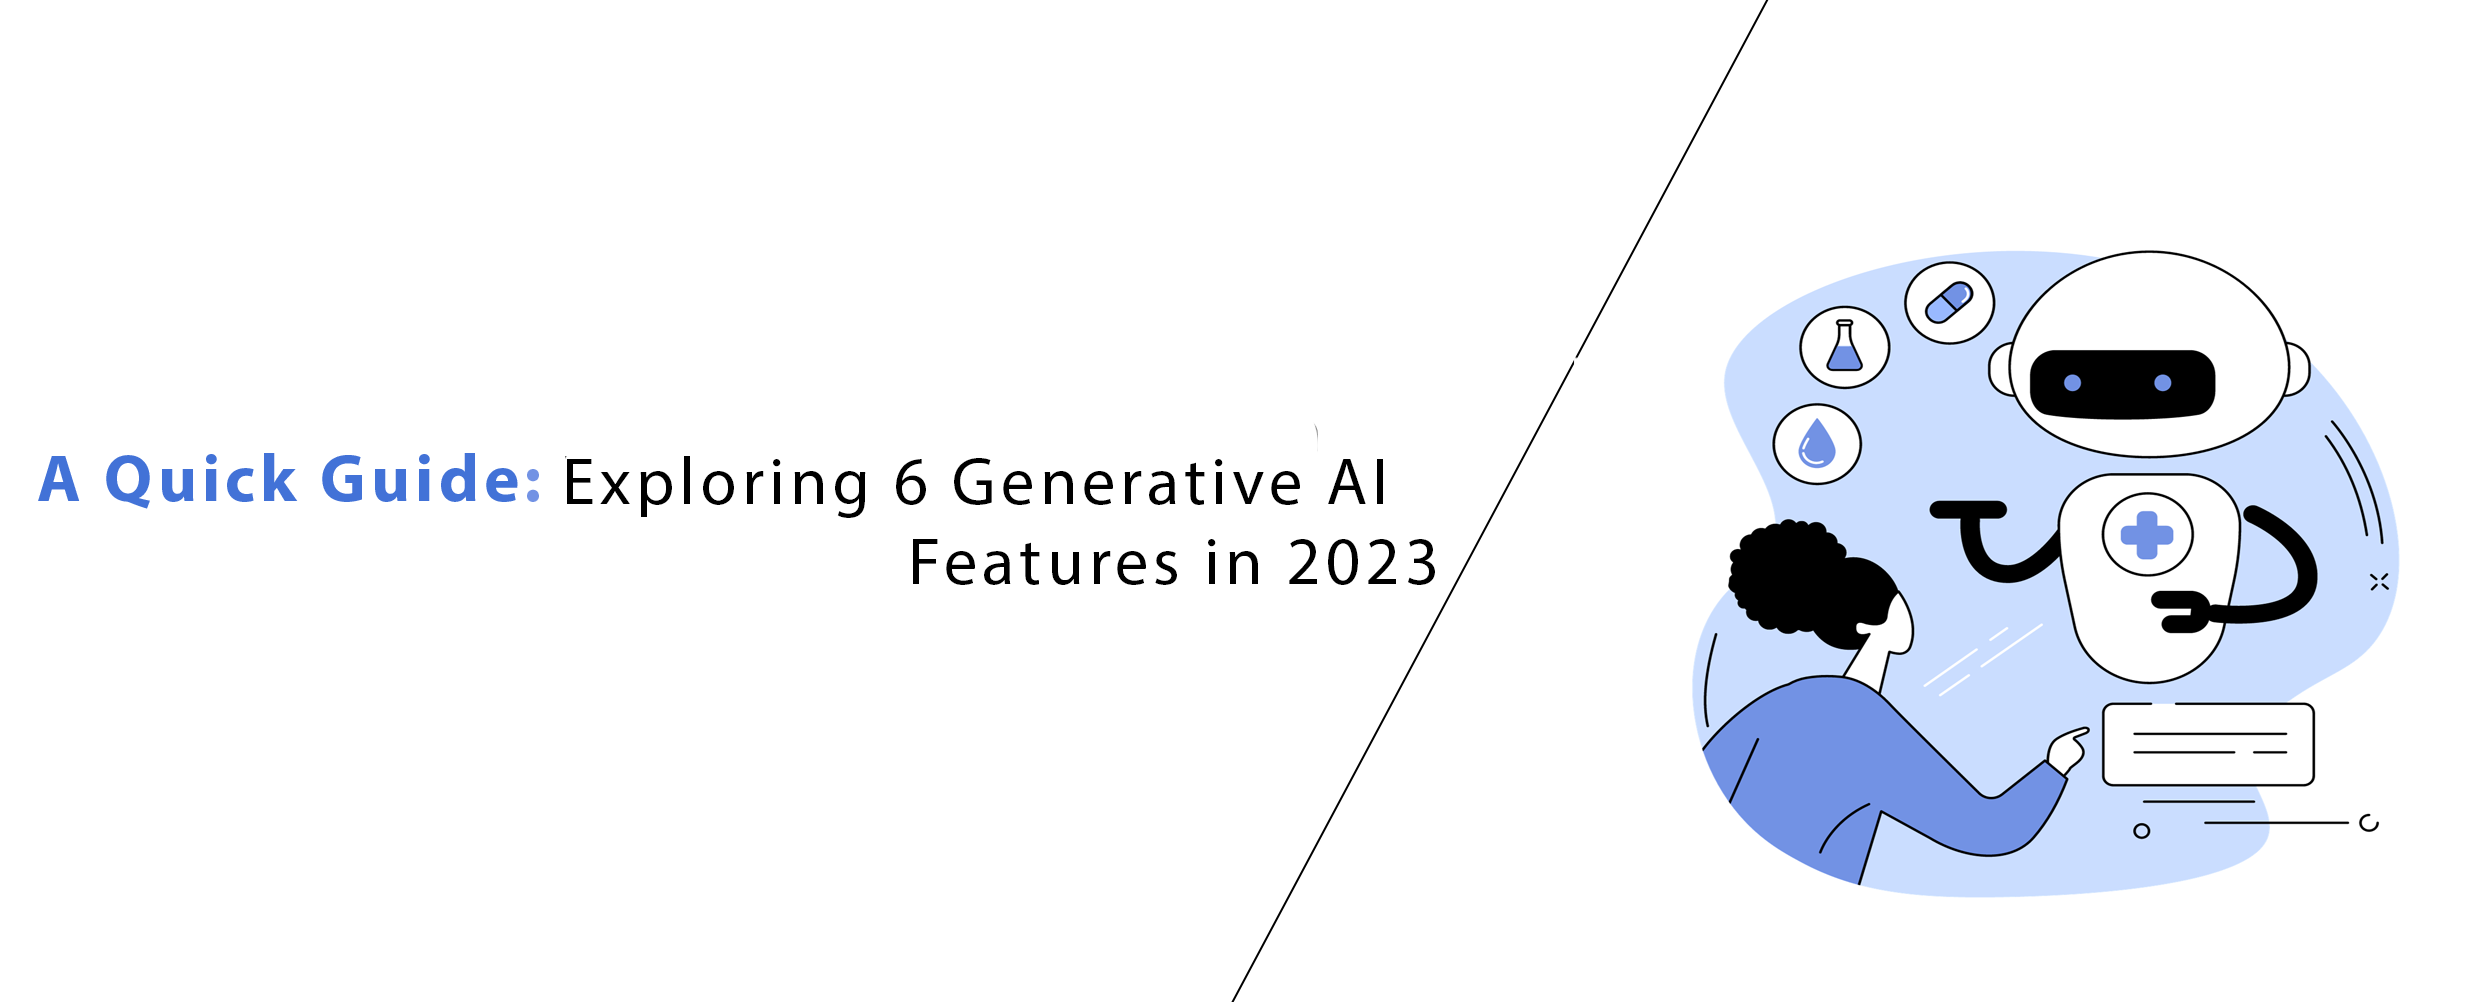 Exploring 6 Generative AI Features Reportedly Coming to Instagram in 2023